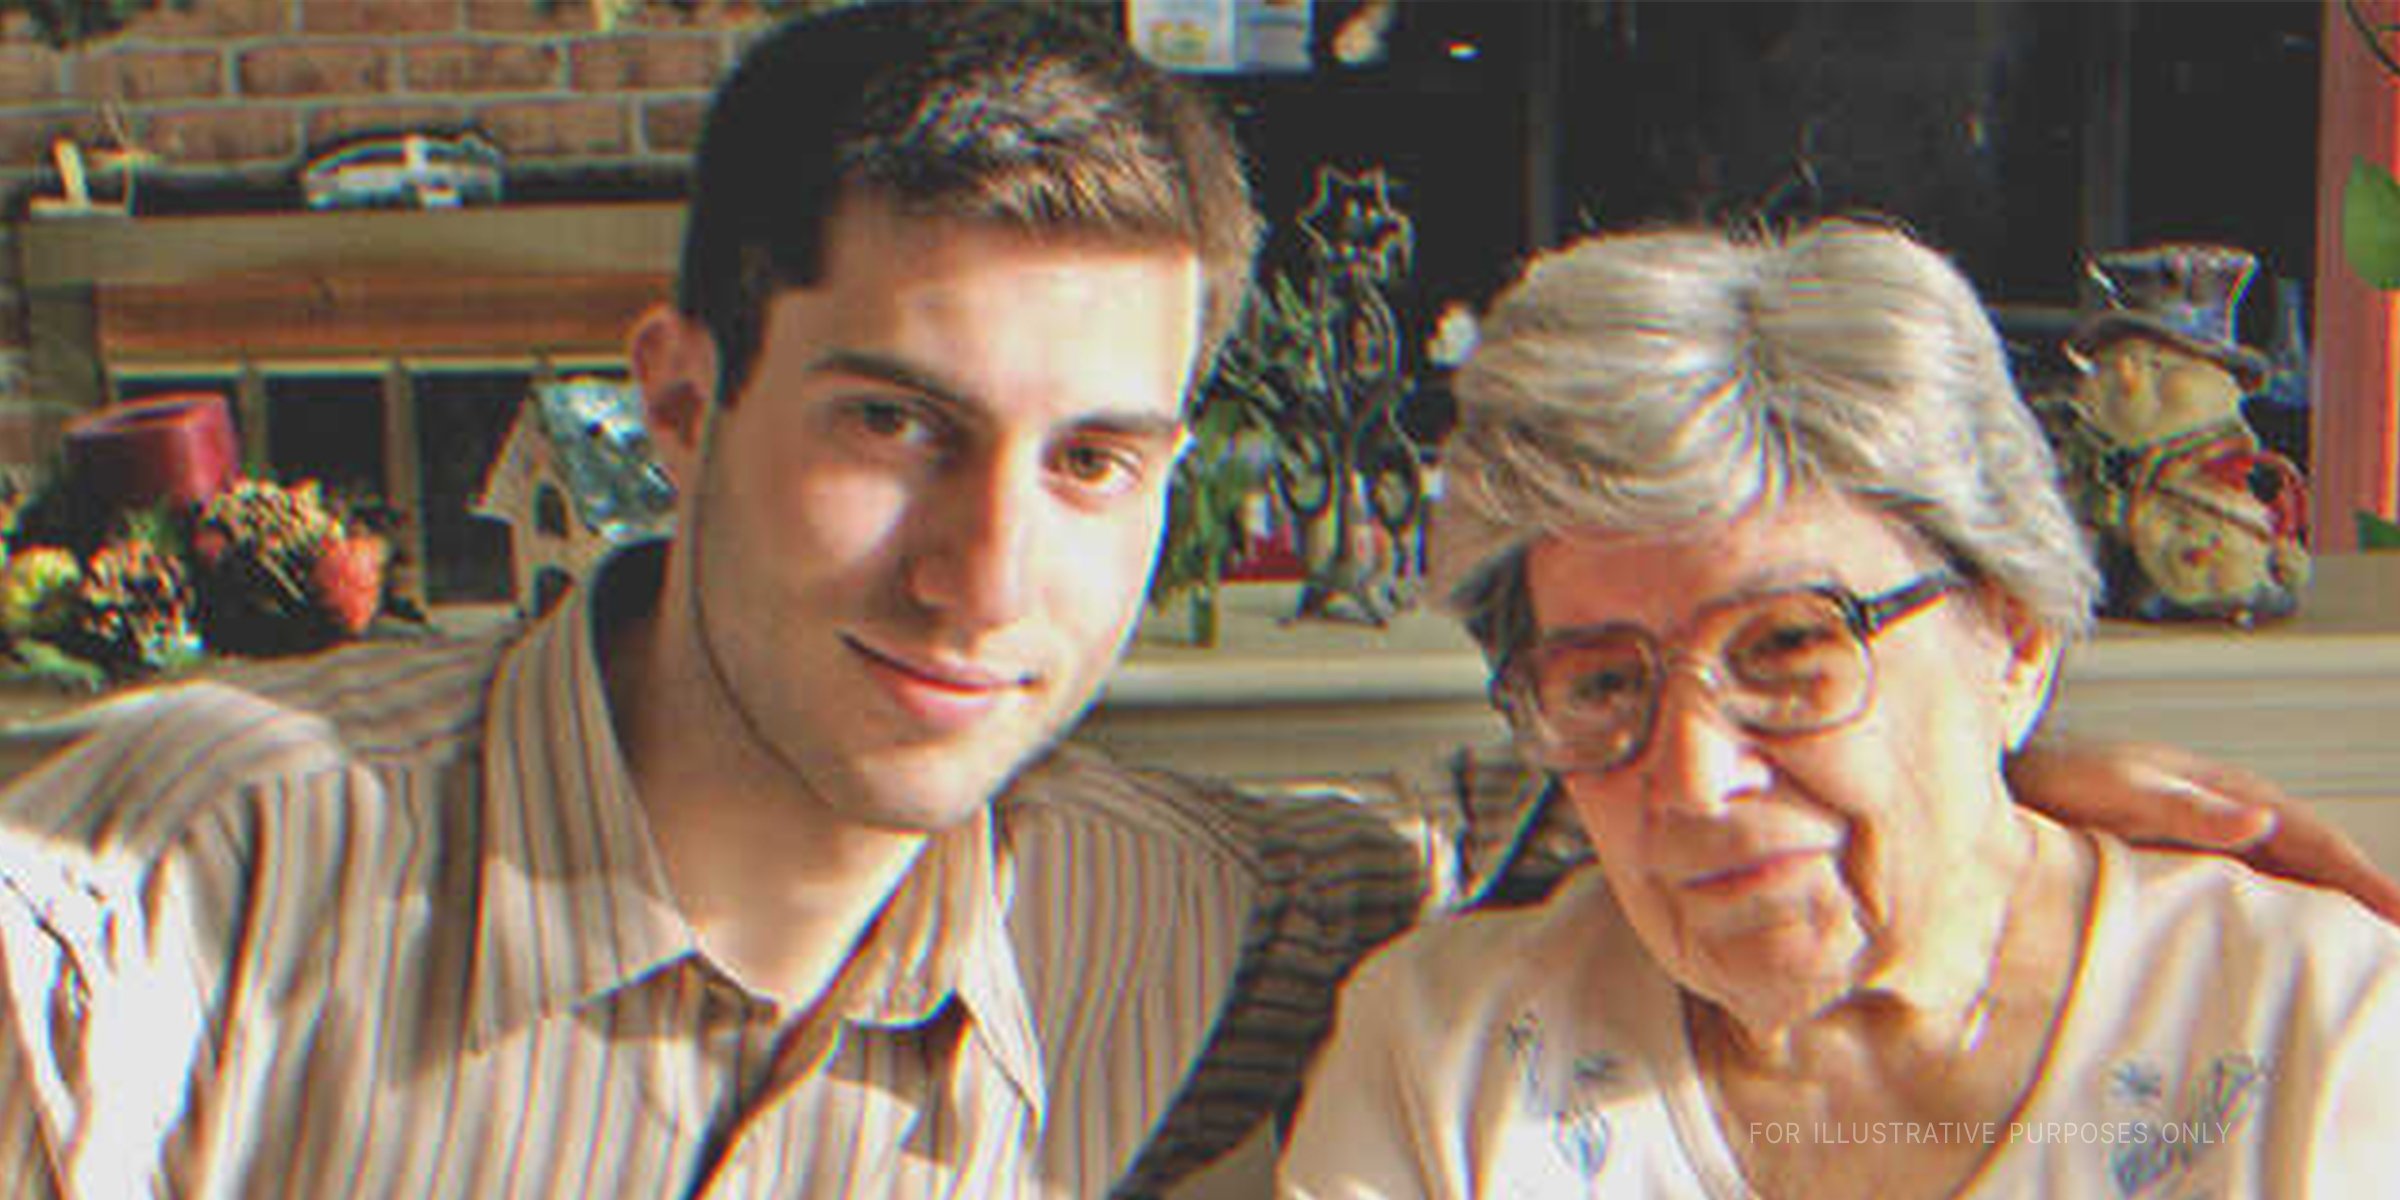 Man poses with his grandmother | Source: Flickr/ireanatzi007 (CC BY 2.0)